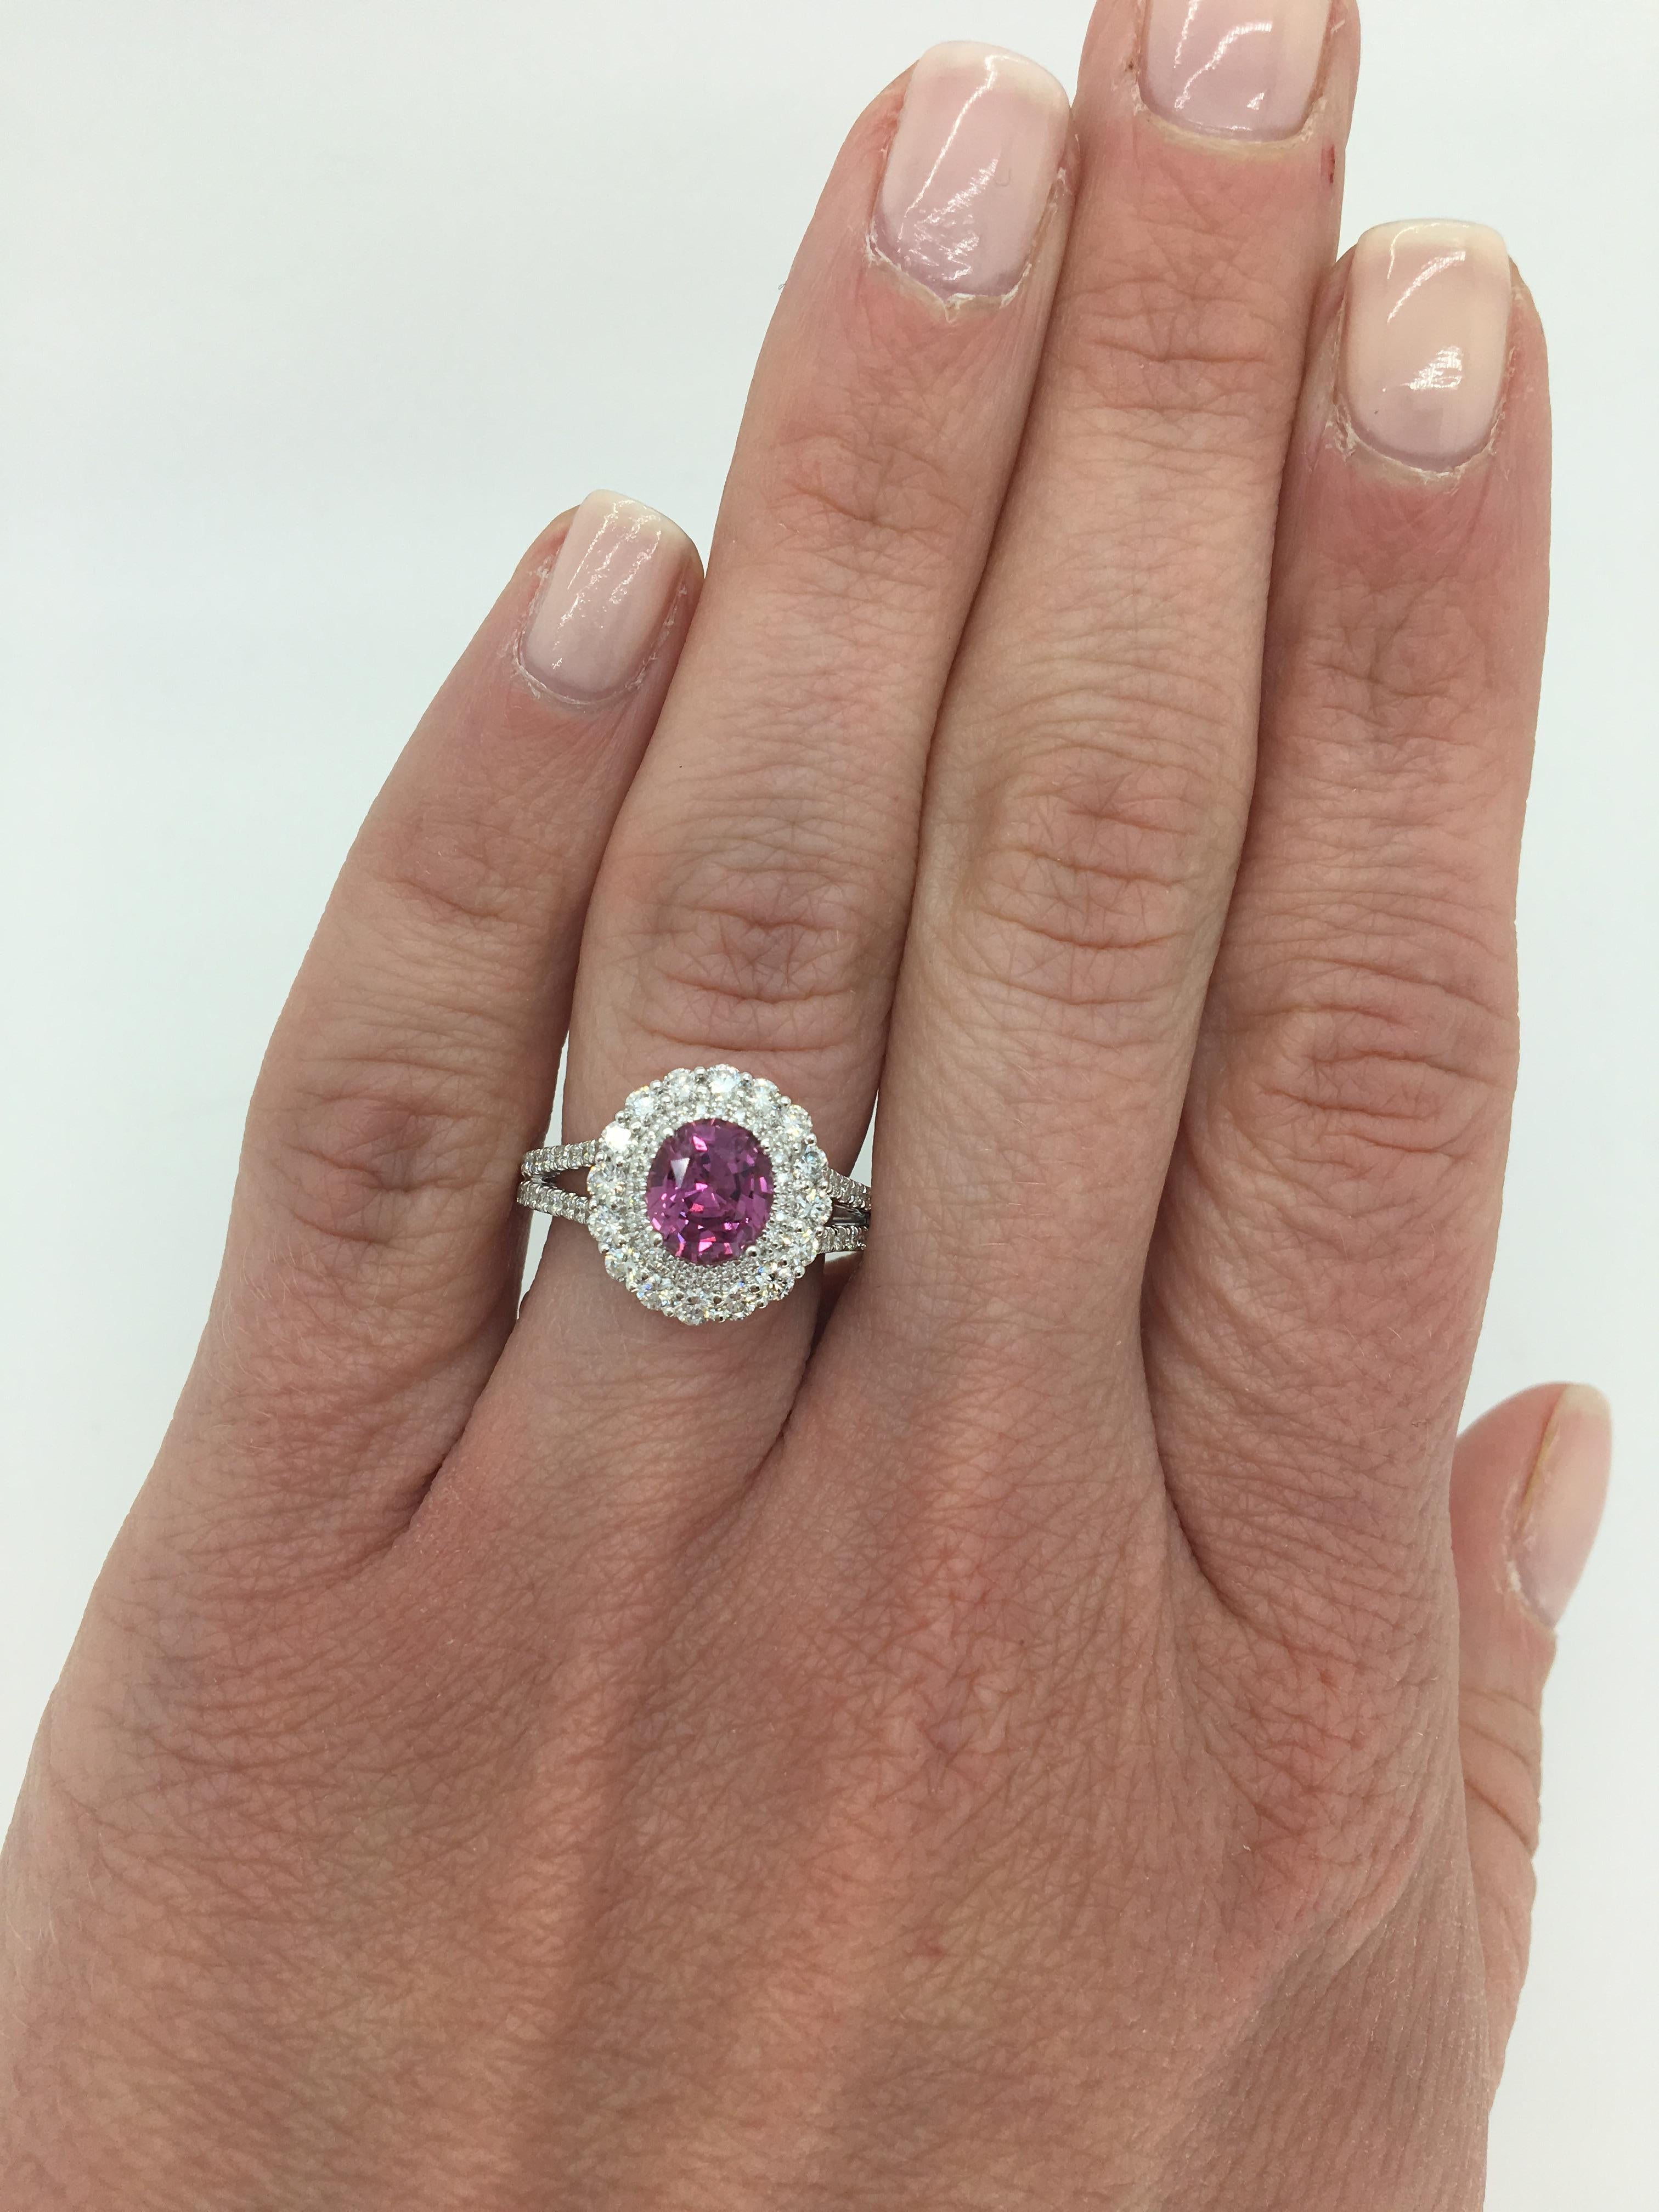 Approximately 1.51CT Pink Sapphire crafted in a 14k white gold split shank diamond halo cocktail ring.

Gemstone: Approximately 1.51CT Oval Cut Pink Sapphire 
Diamond Carat Weight: Approximately .80CTW
Diamond Cut: Round Brilliant 
Diamond Color: